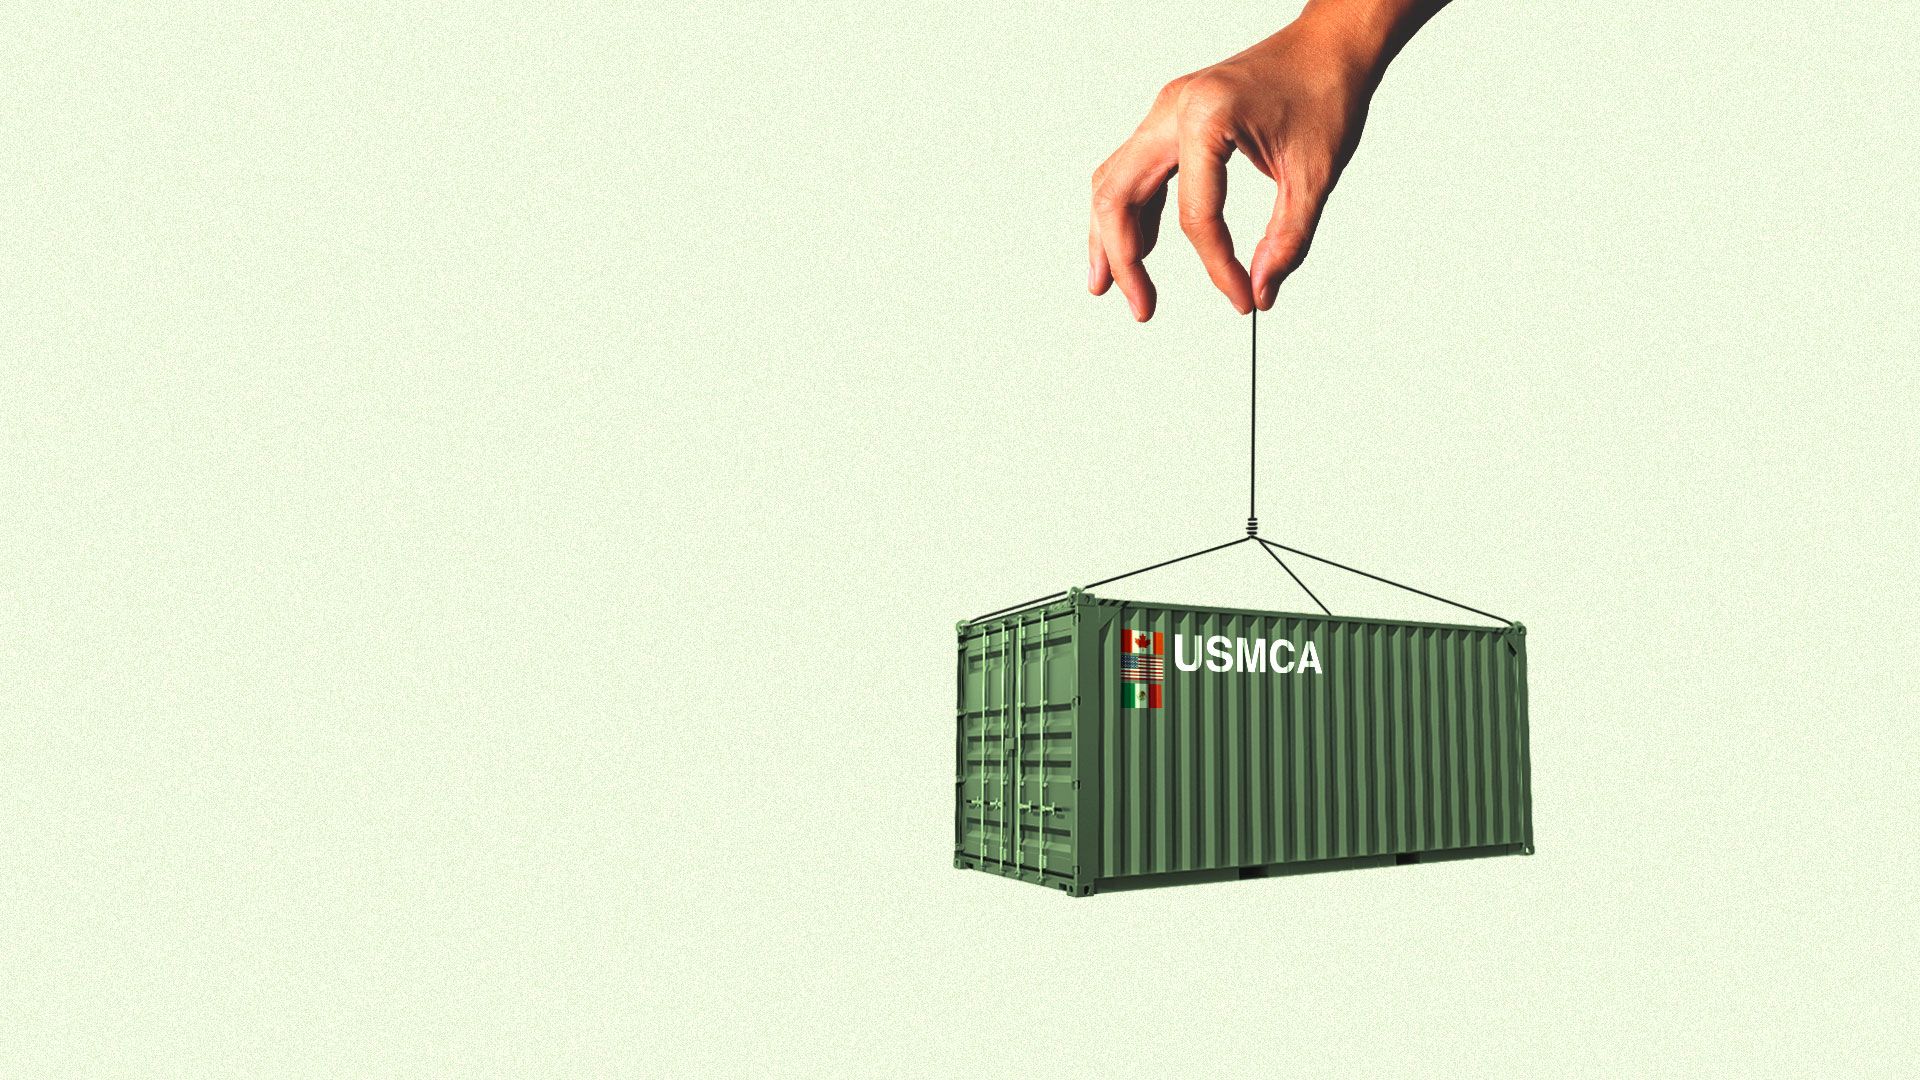 A hand holding a shipping container labeled USMCA by a fine string